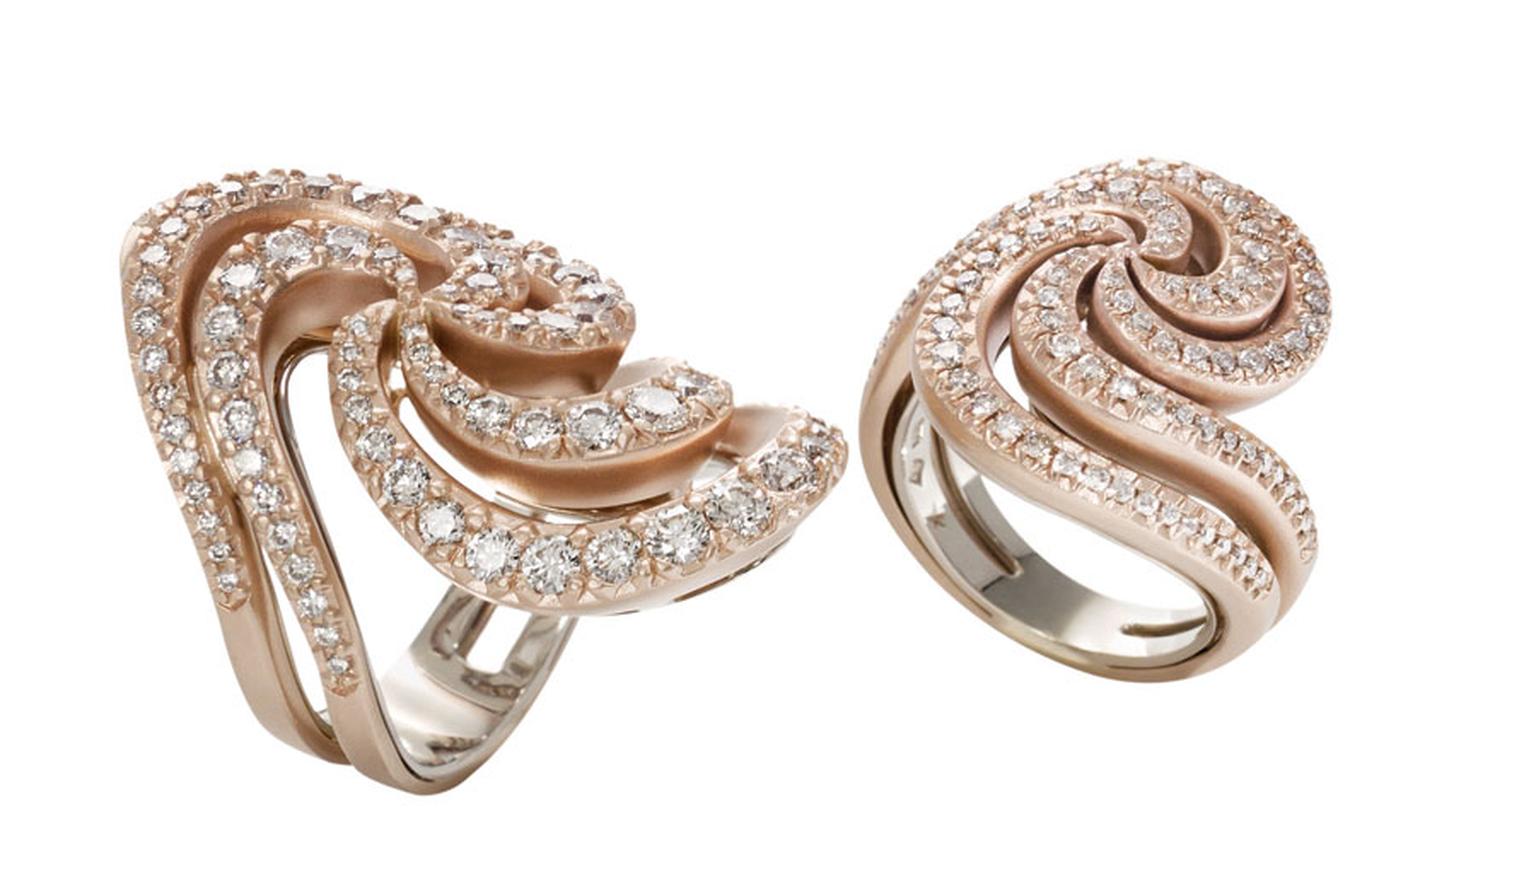 H-Stern-Rings-in-rose-and-Noble-Gold-with-diamonds-